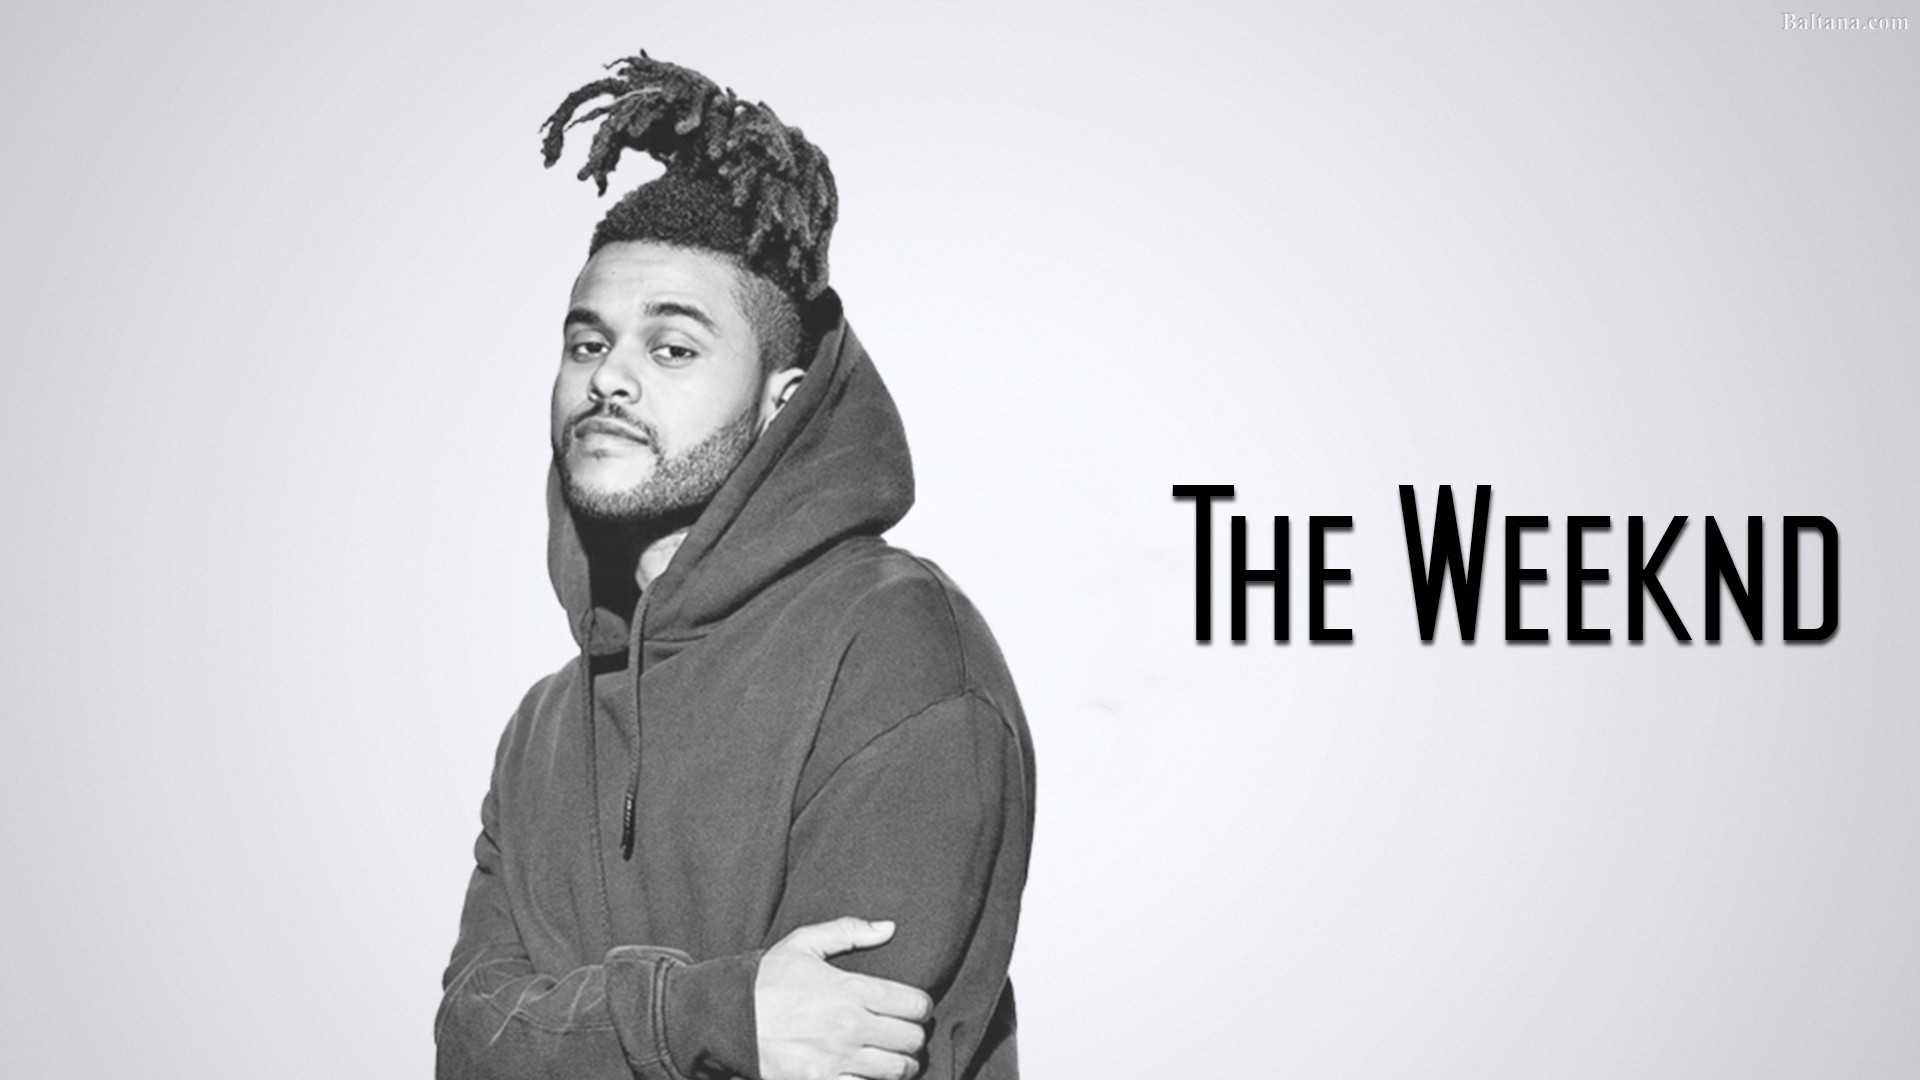 Again the weekend. Группа weekend. The Weeknd. Певец the Weeknd. The Weeknd фотосессия.